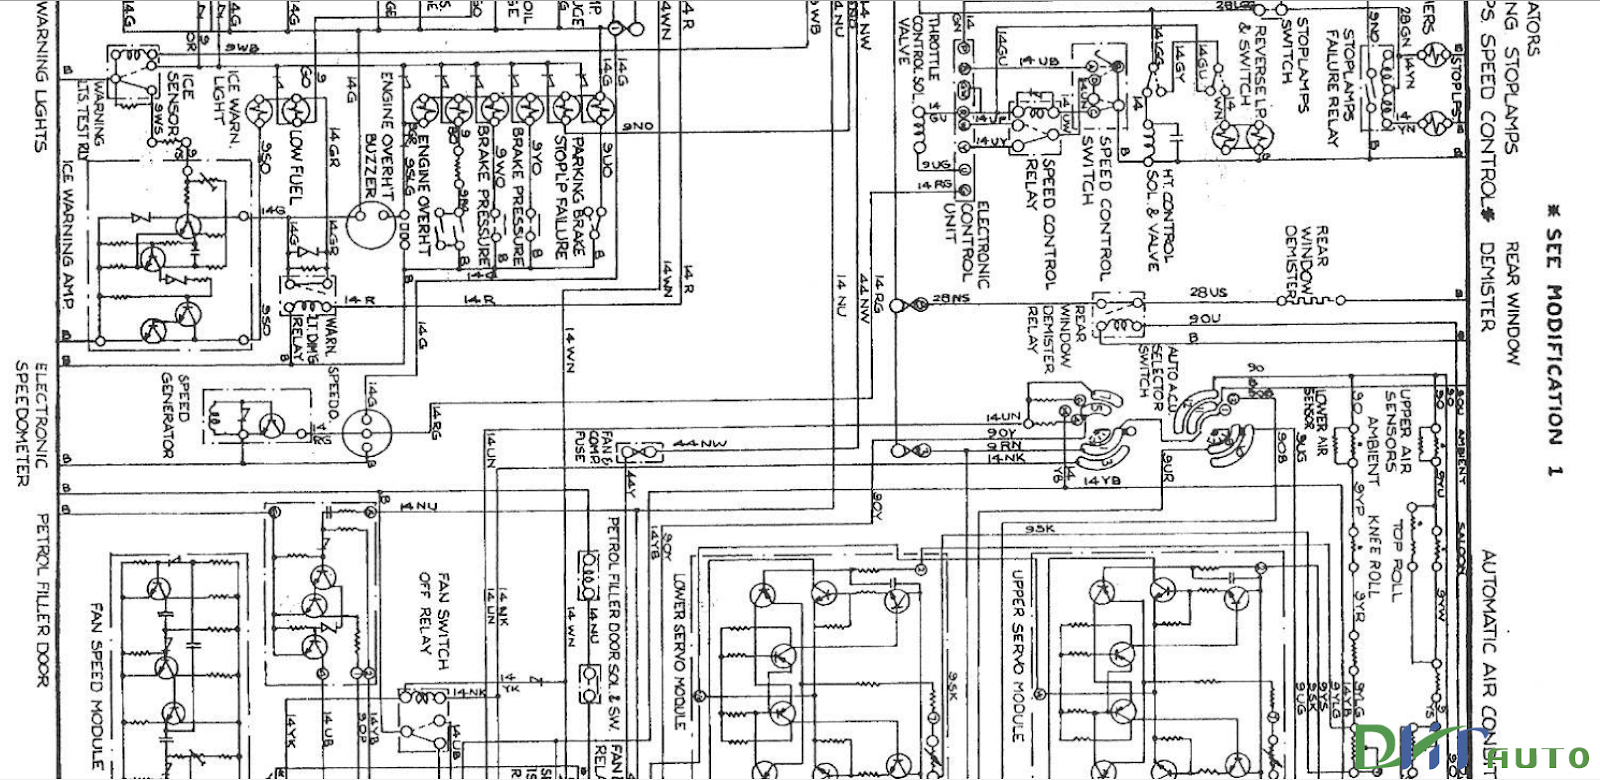 ROLLS ROYCE WIRING DIAGRAMS - Automotive Library